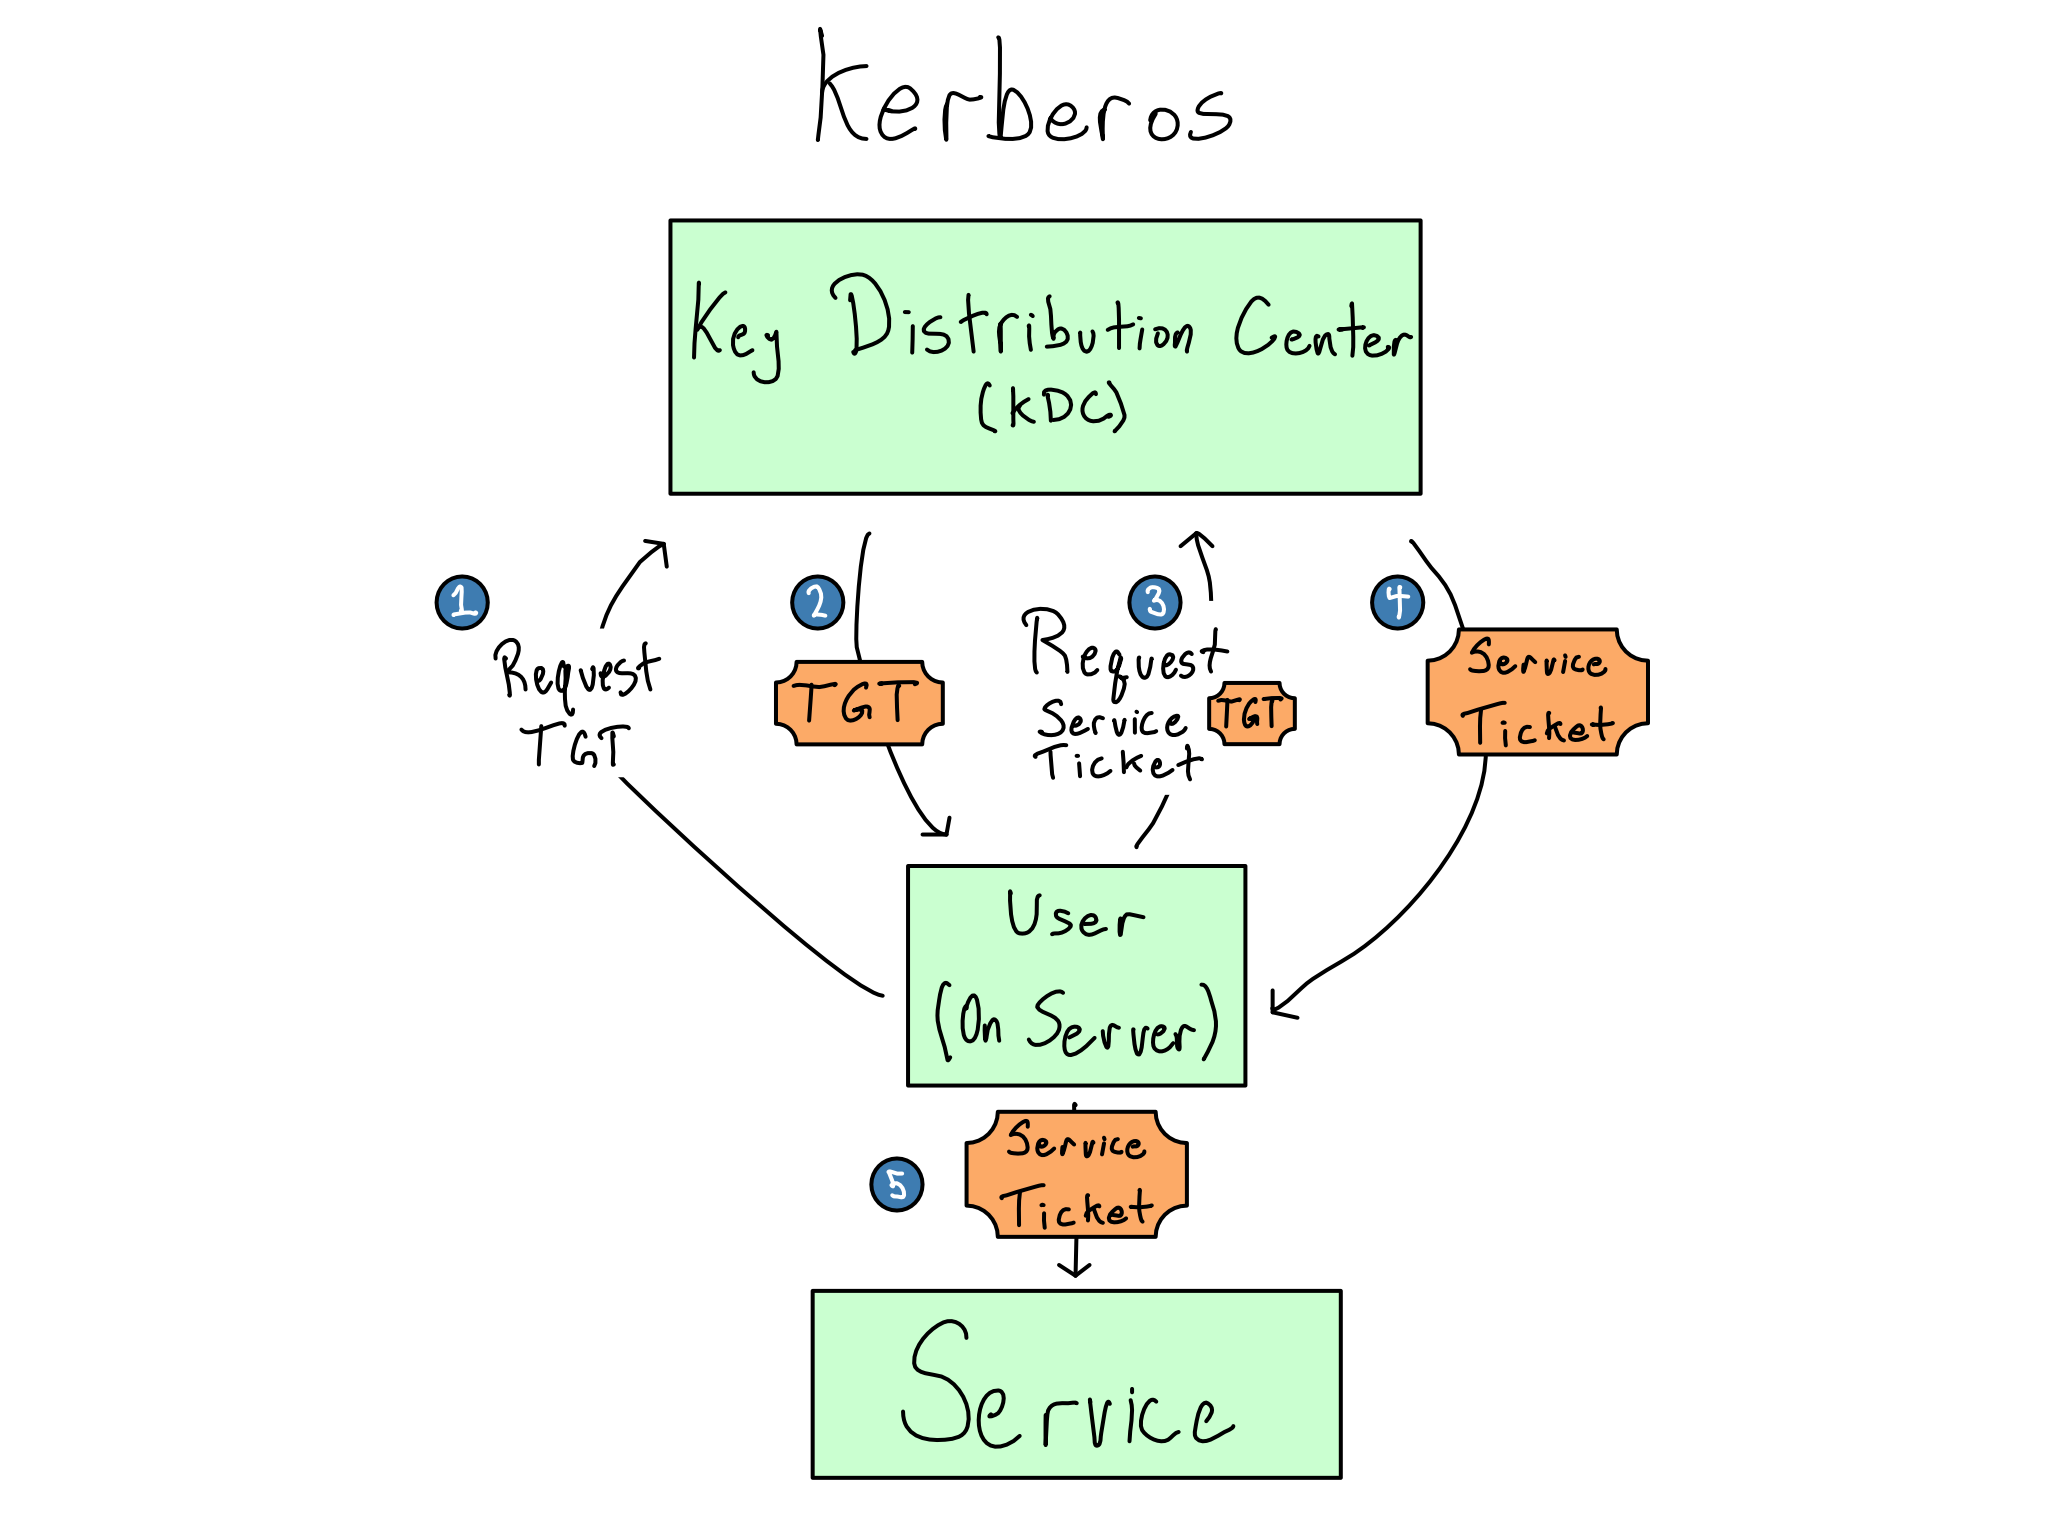 The kerberos flow. 1 - User on server requests TGT from KDC. 2 - TGT granted. 3 - user requests service ticket with TGT from KDC. 4 - Service ticket granted. 5 - user uses service ticket to access service.